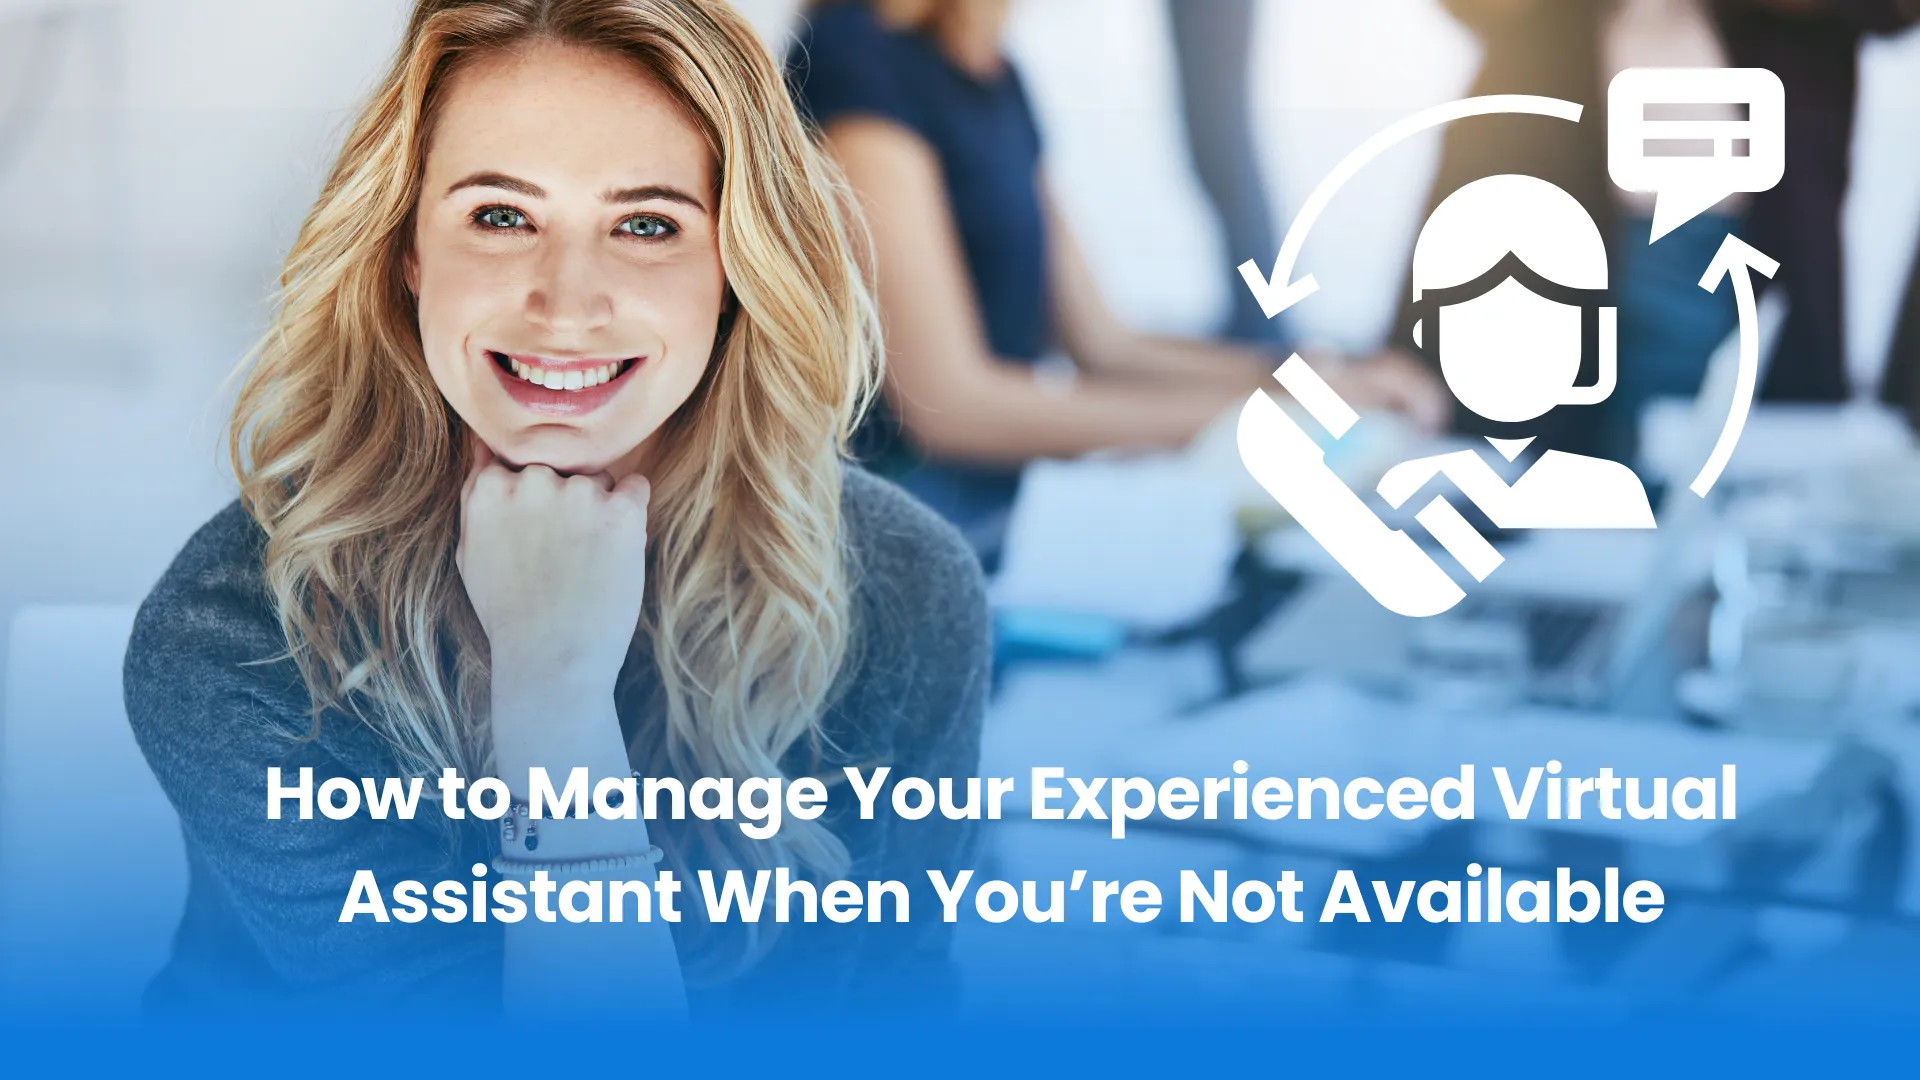 How to Manage Your Experienced Virtual Assistant When You’re Not Available